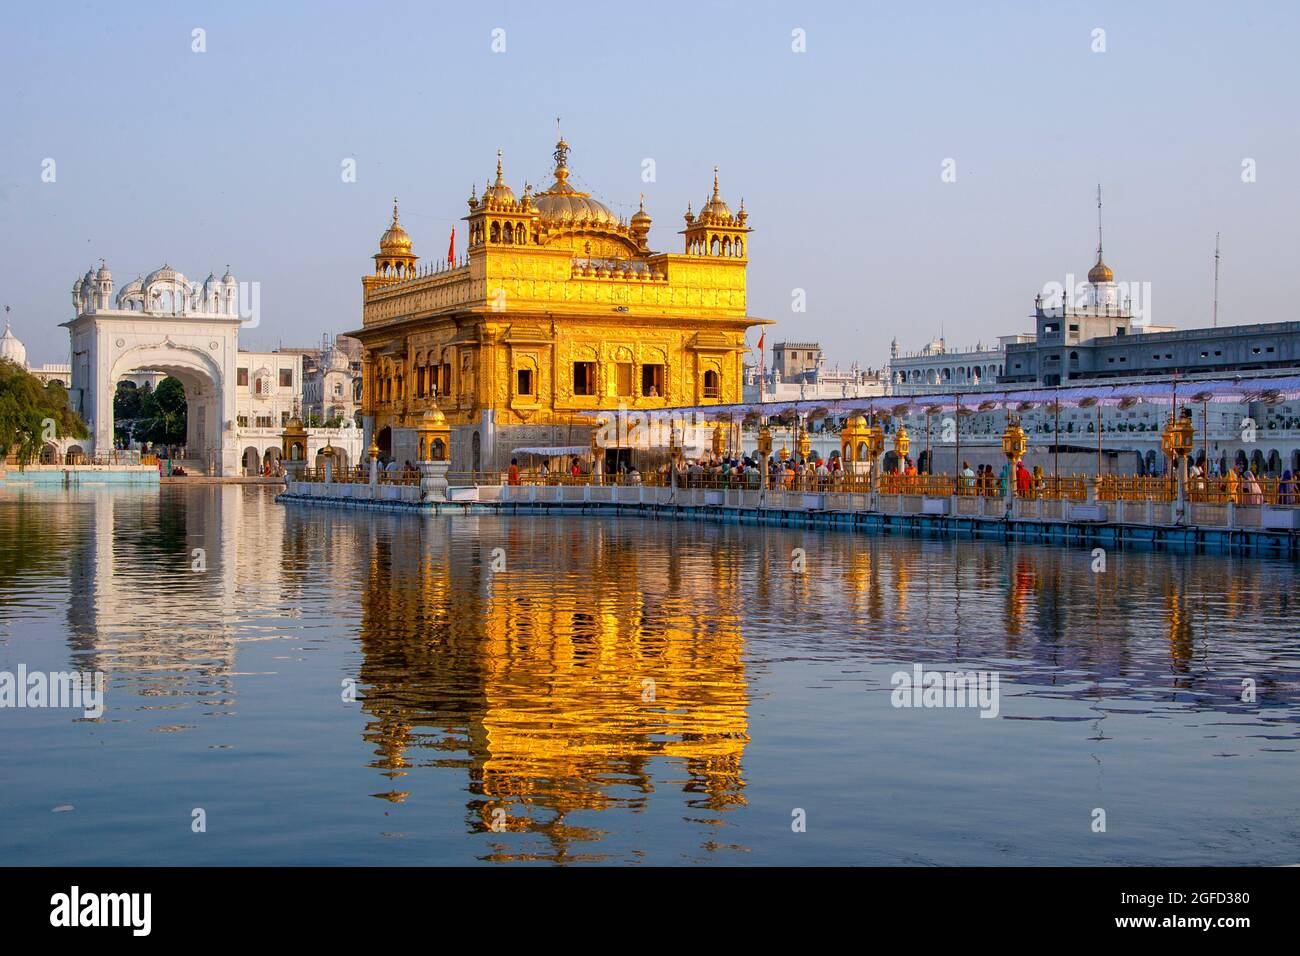 The Golden Temple (also known as Harmandir Sahib, lit. 'abode of God' or Darbār Sahib, meaning 'exalted court') is a gurdwara (place of assembly and w Stock Photo